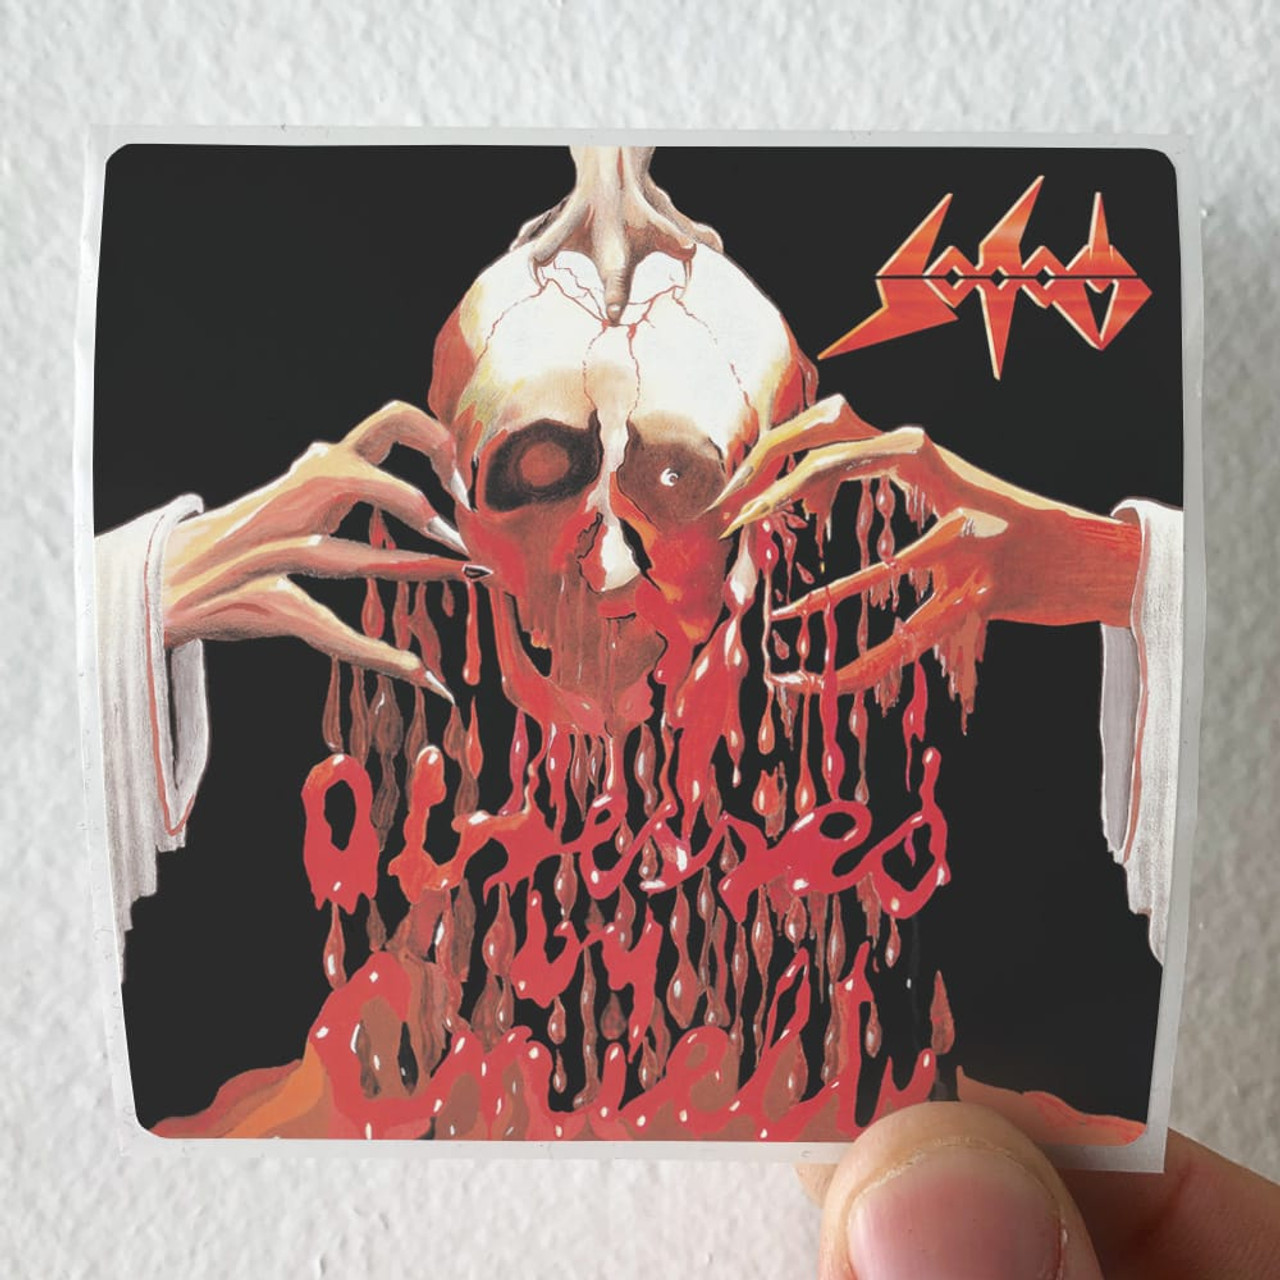 Sodom Obsessed By Cruelty 1 Album Cover Sticker